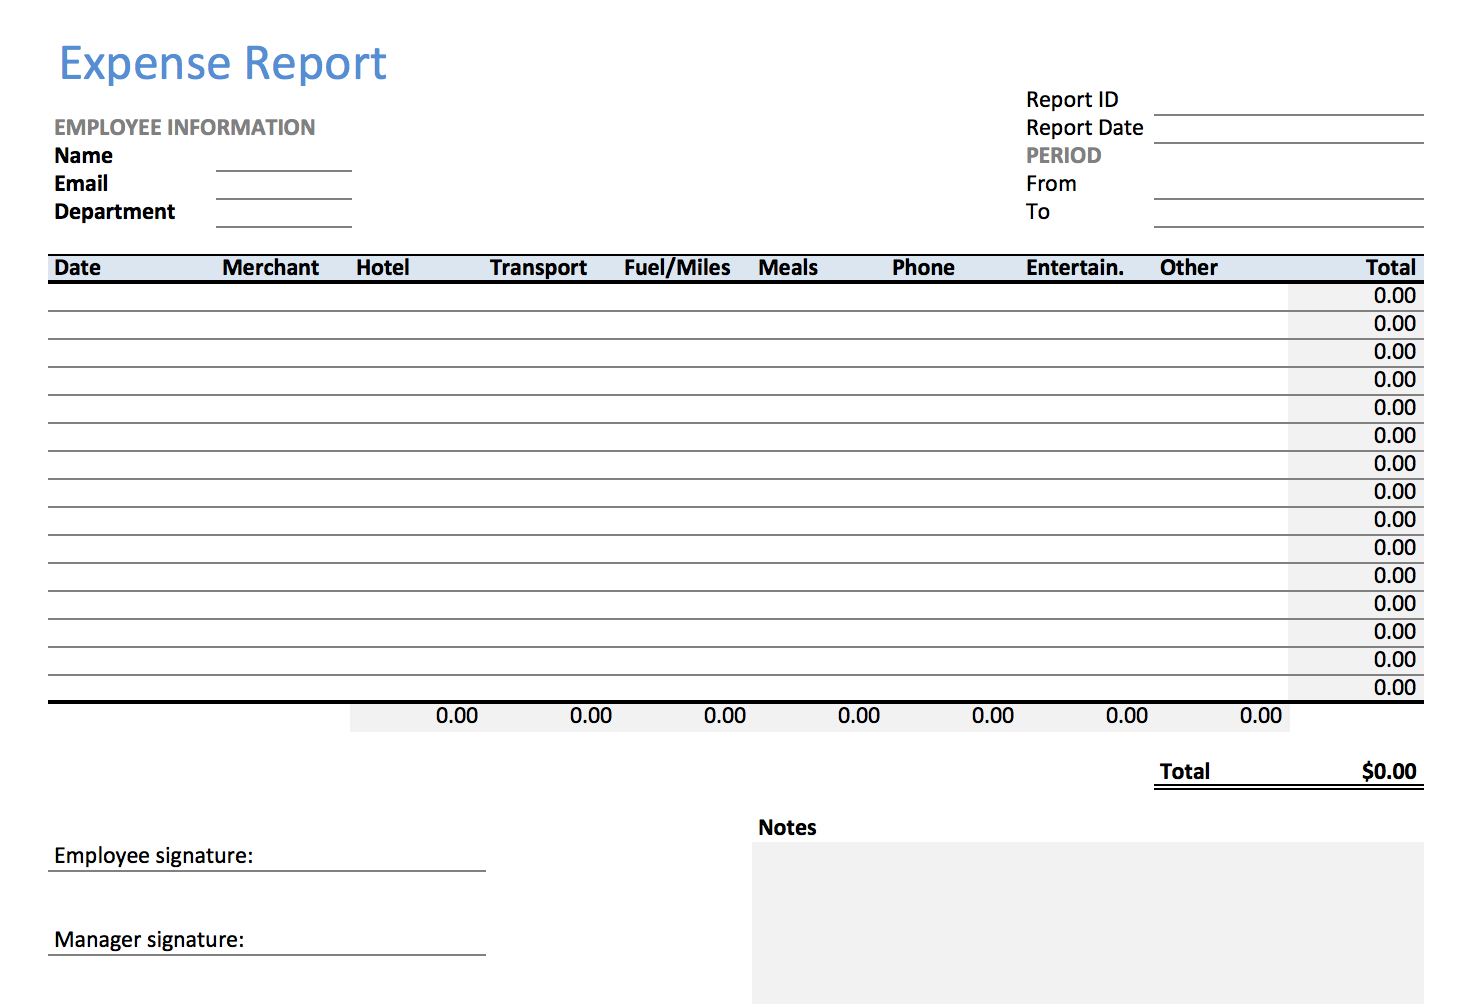 excel-expense-report-template-keepek-and-detailed-expense-report-template-db-excel